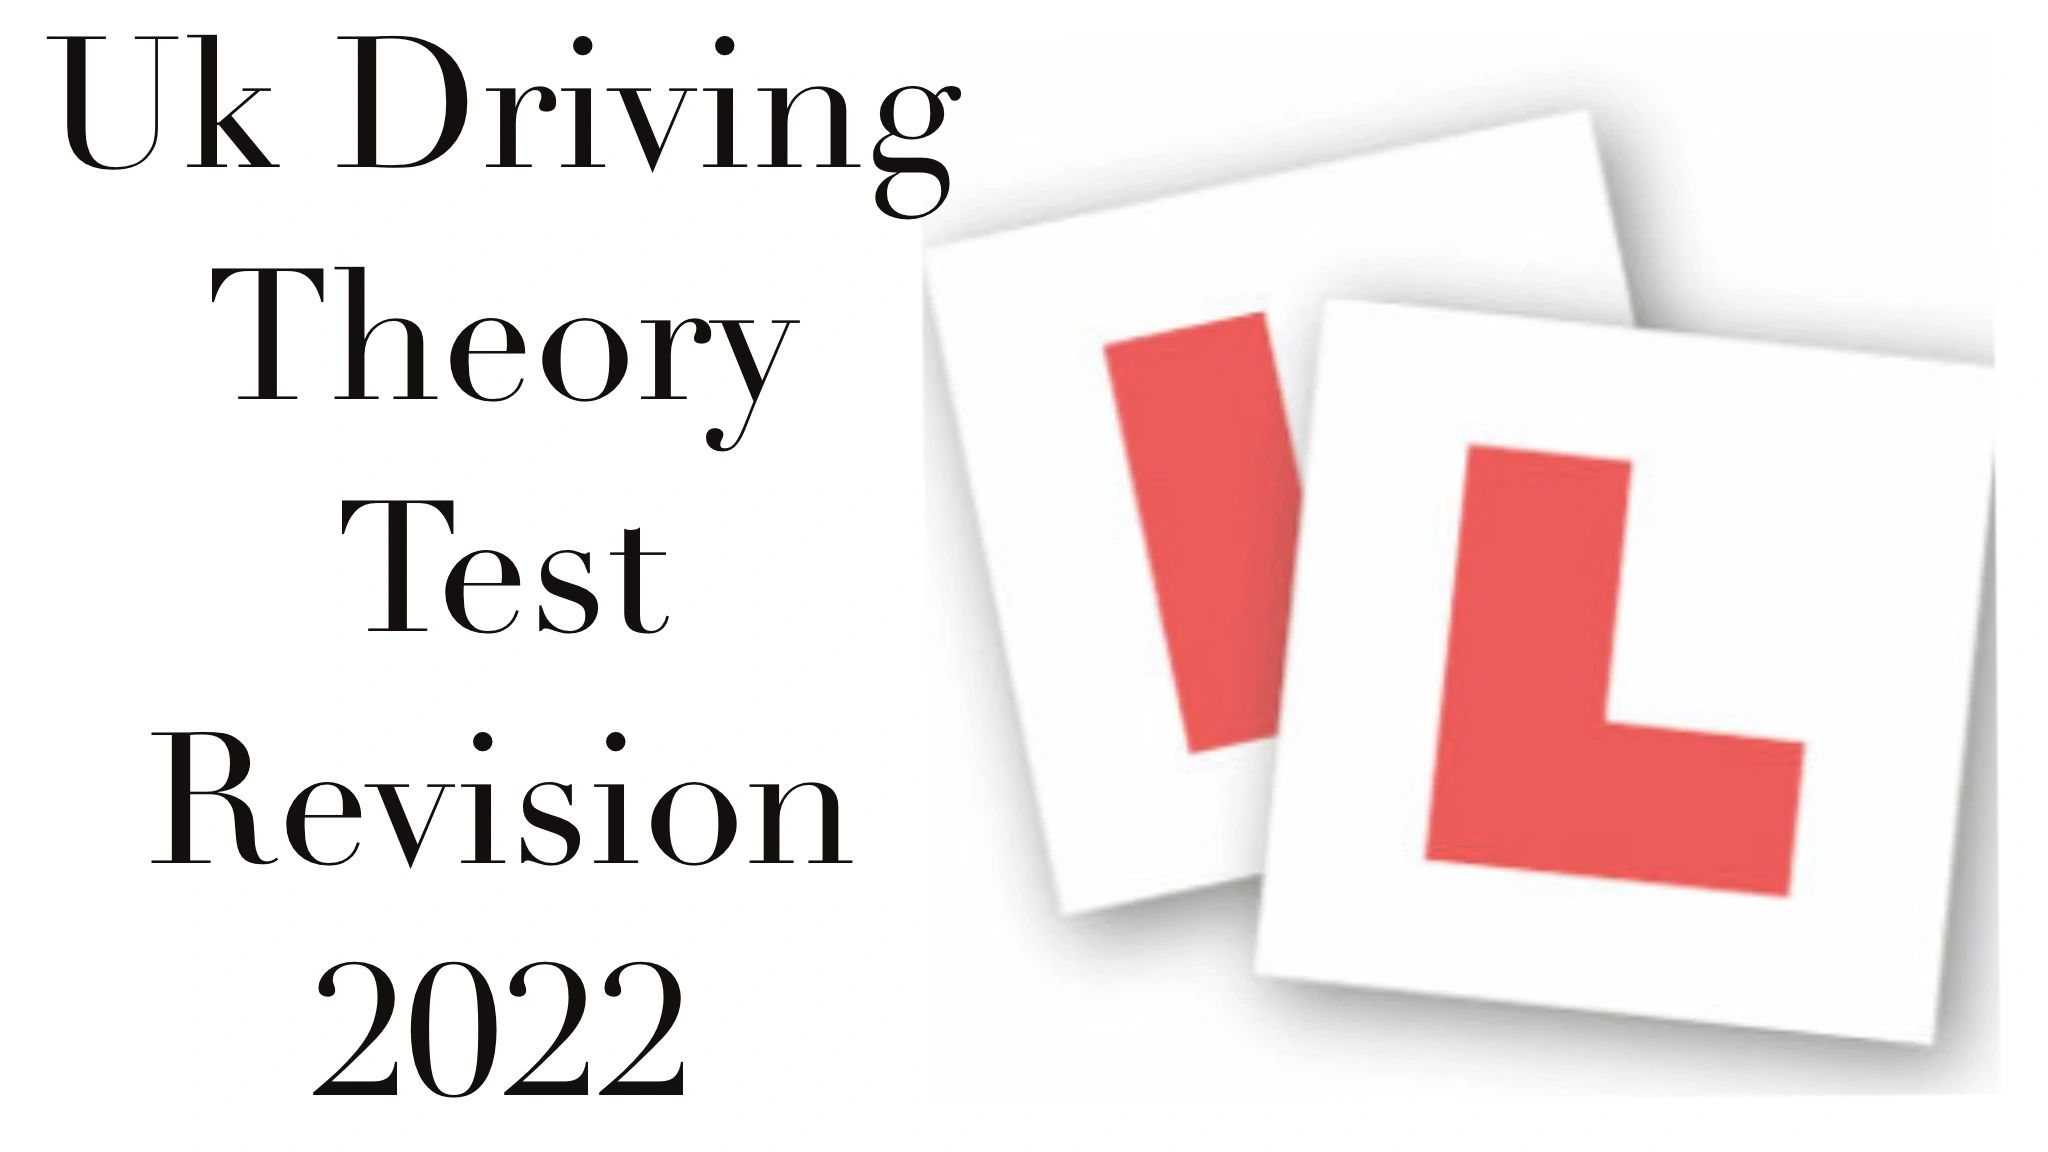 Uk driving theory test revision 2022